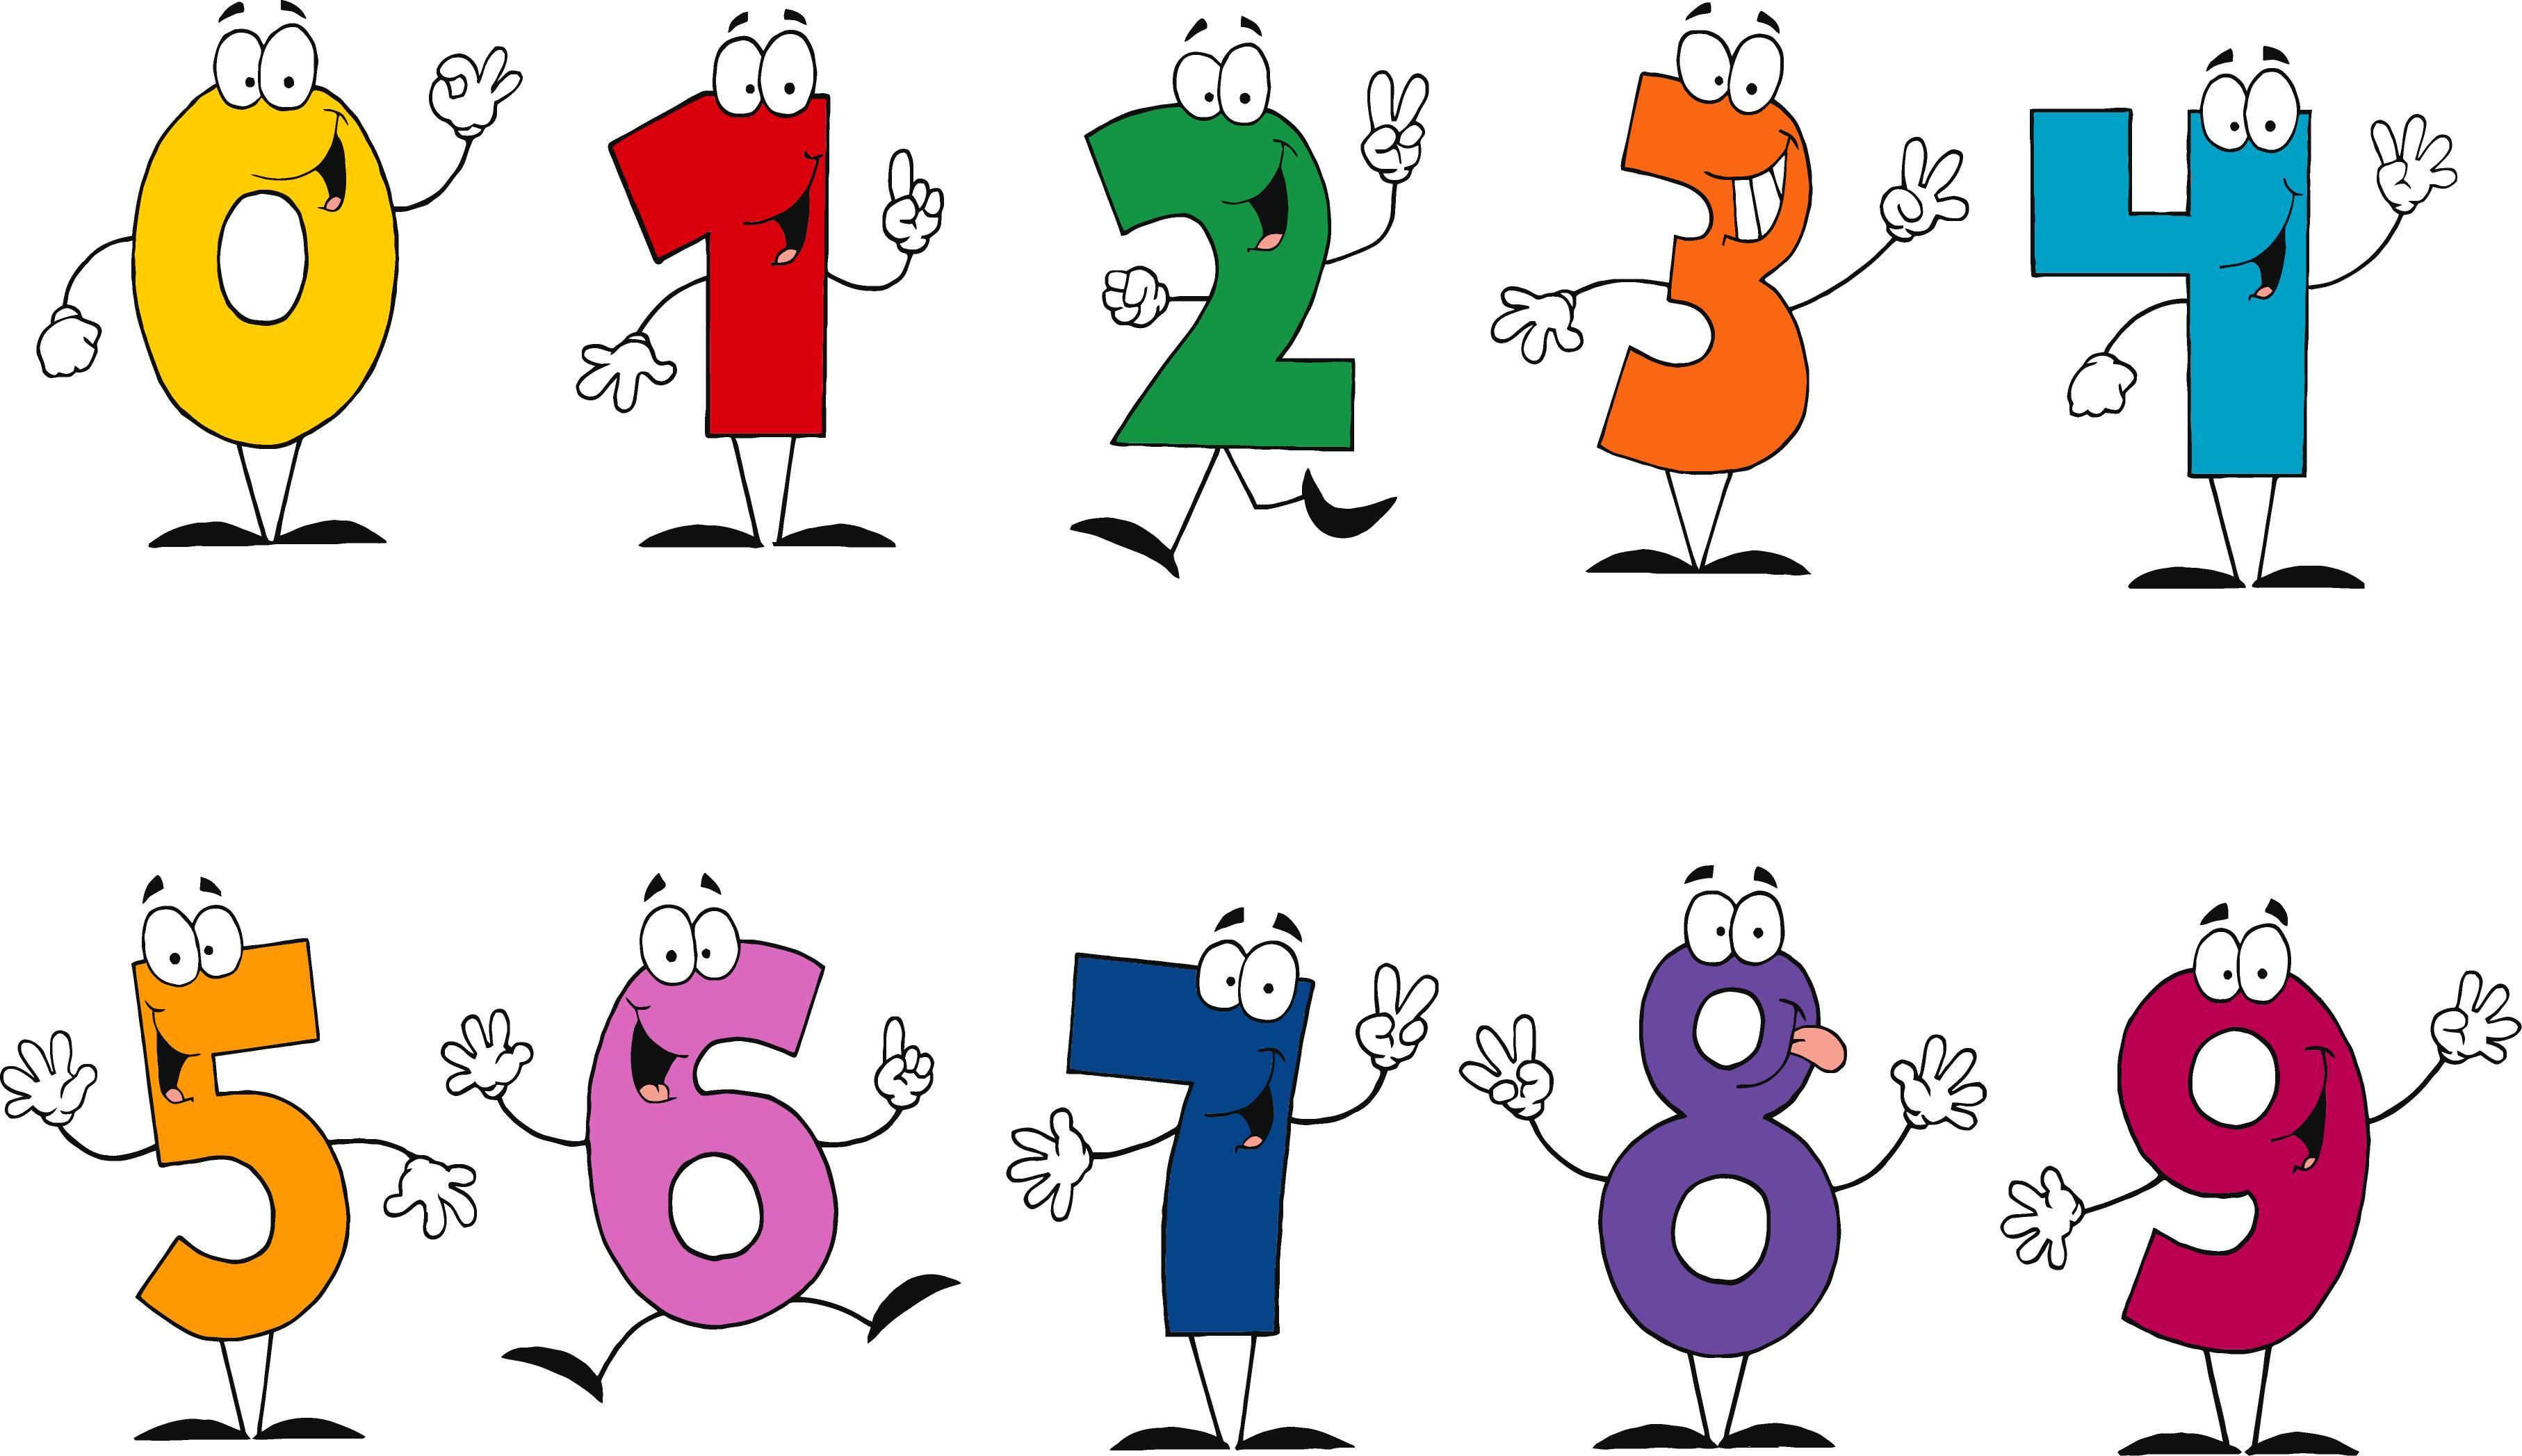 Numbers clipart 0 free clipar